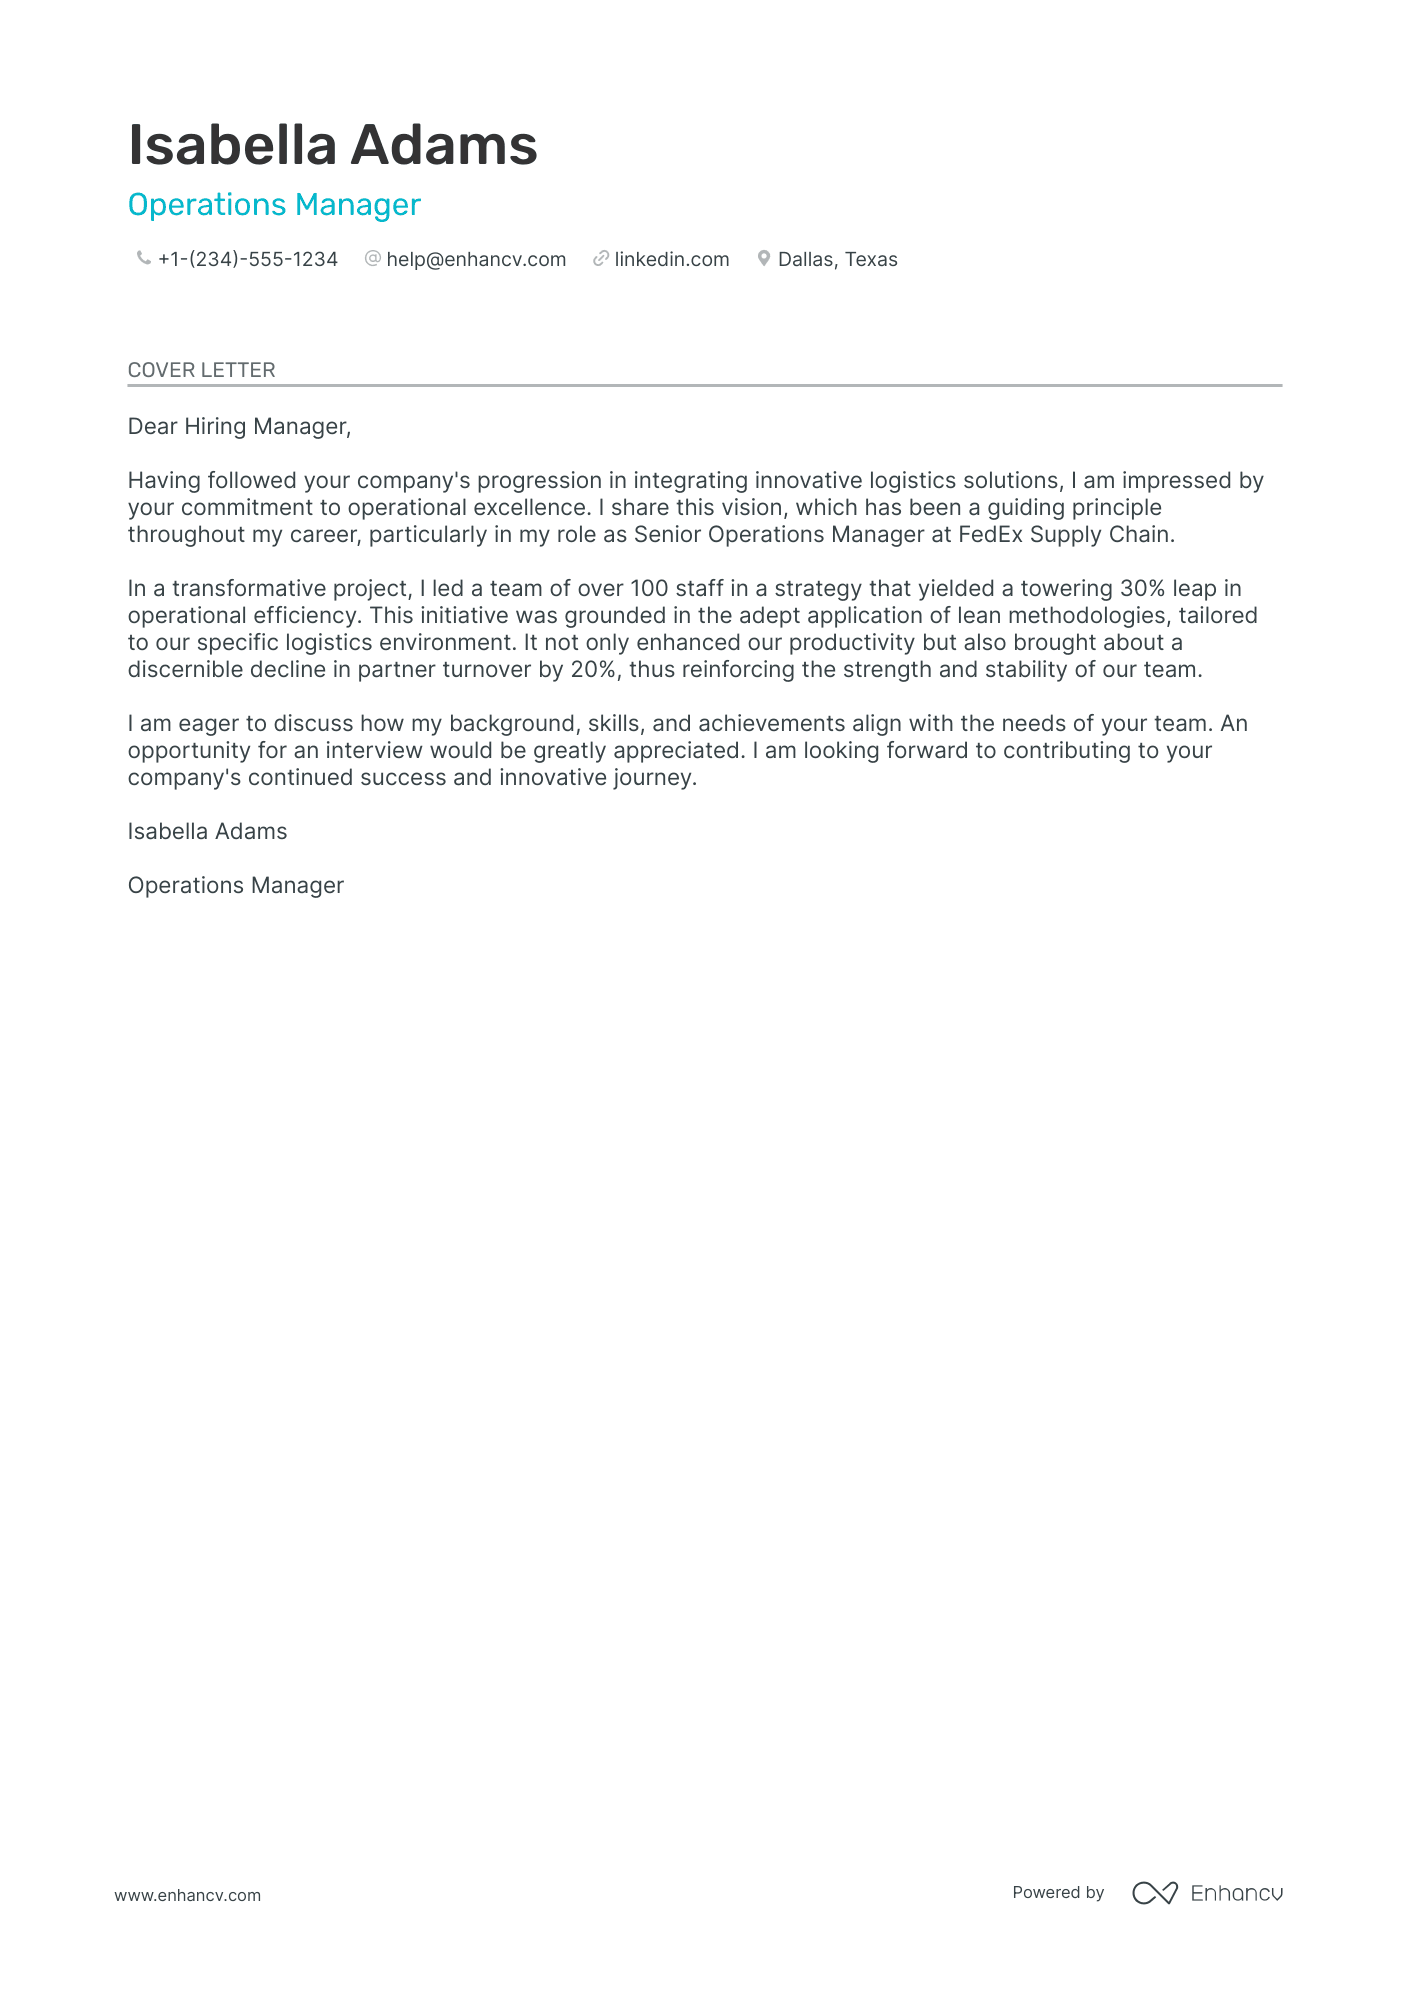 Transportation Operations Manager cover letter